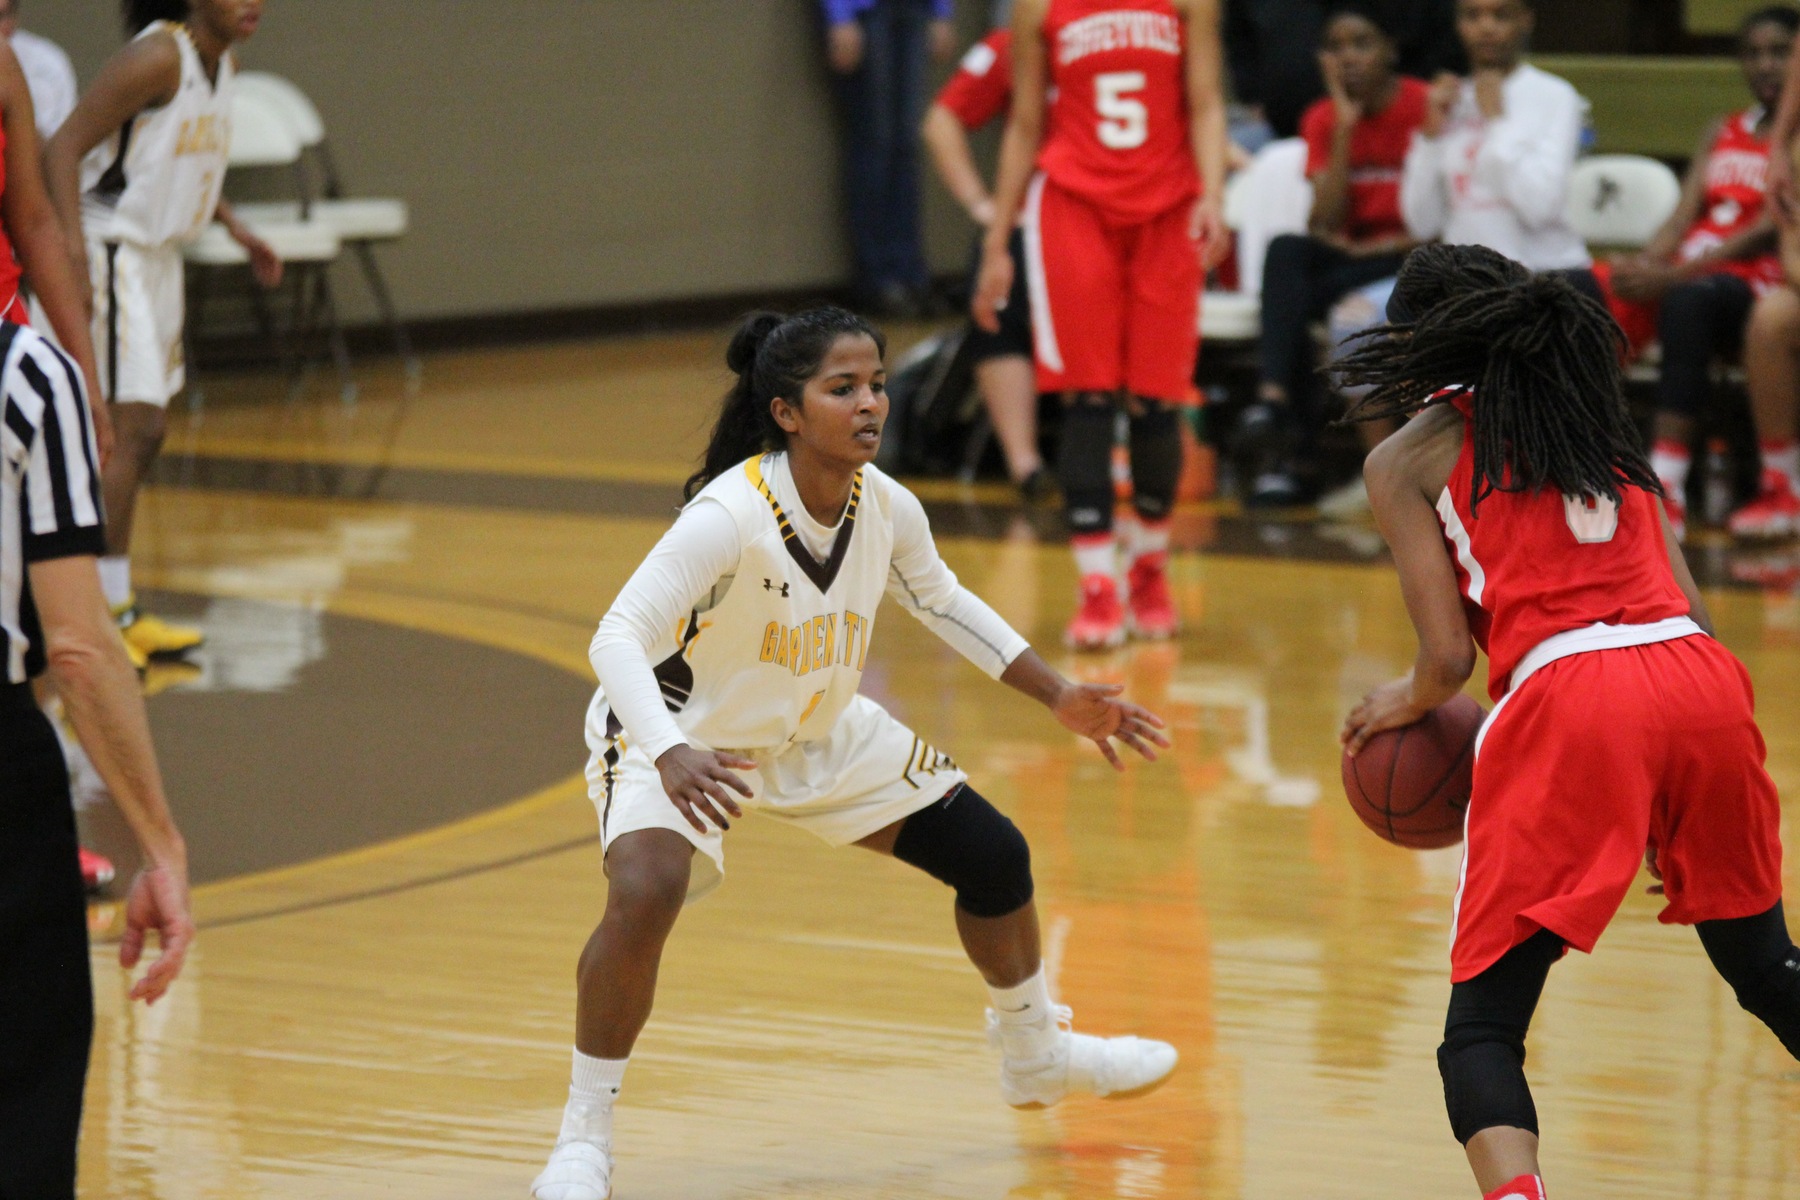 Broncbusters fourth-quarter rally comes up short against Coffeyville